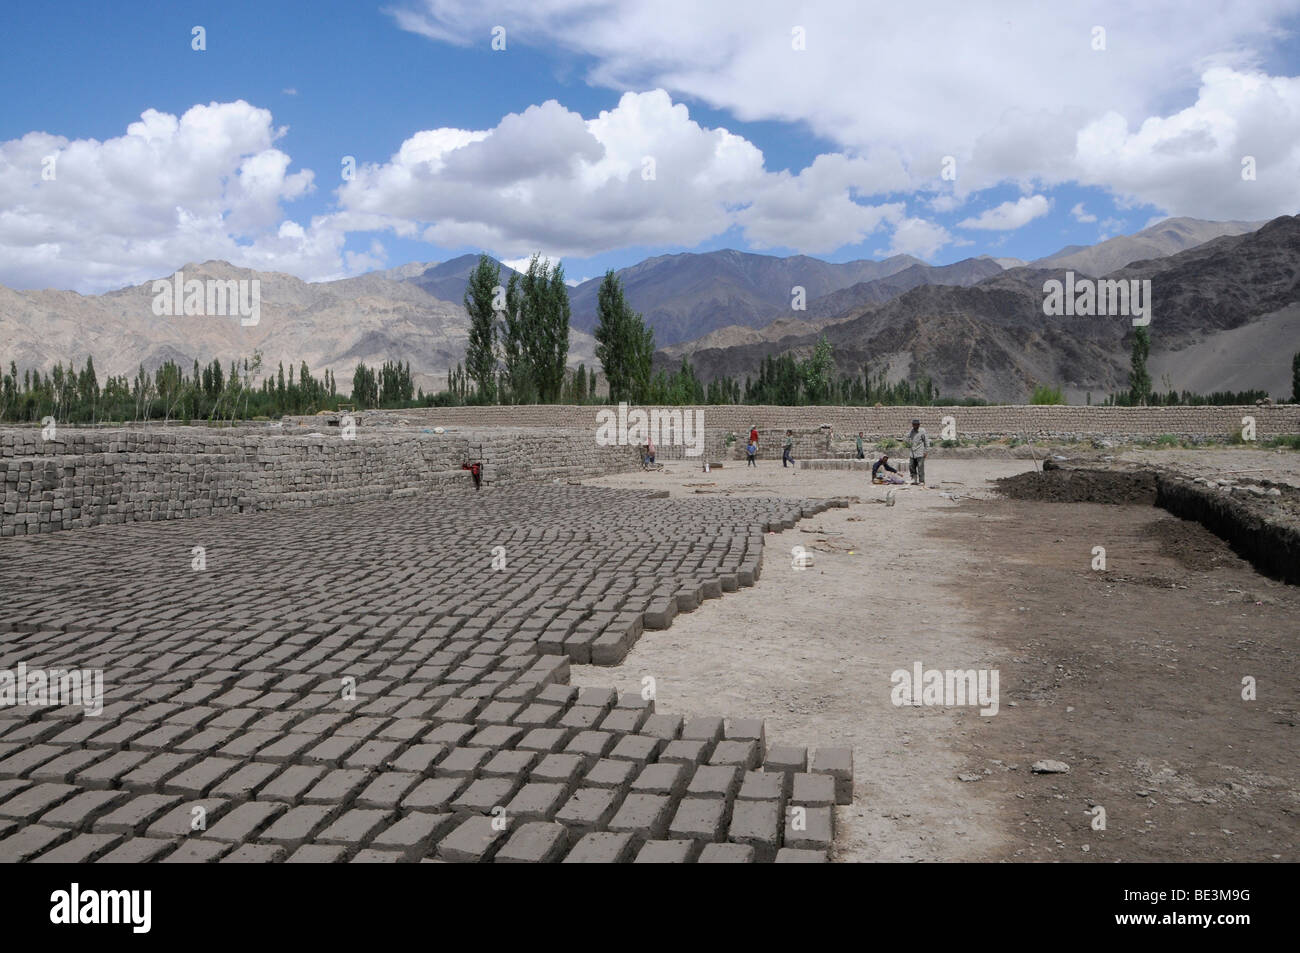 Brickyard which manufactures air-dried clay bricks in the Indus valley, Traktok, Ladakh, India, Himalayas, Asia Stock Photo